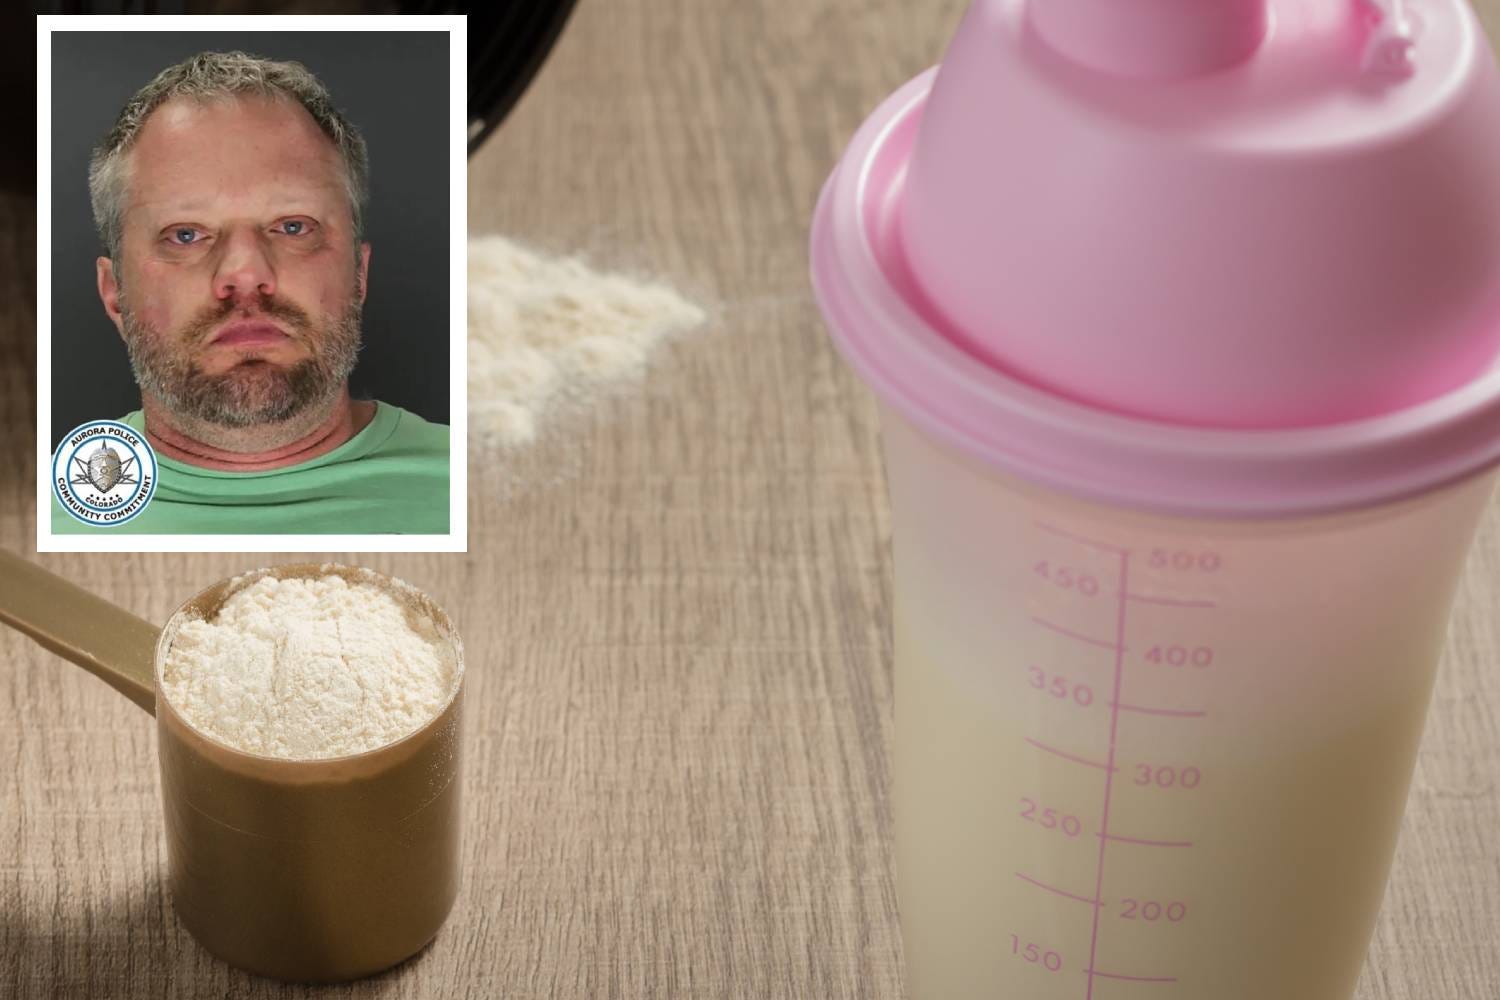 Colorado Dentist Arrested For Allegedly Killing His Wife By Poisoning Her Protein Shakes In